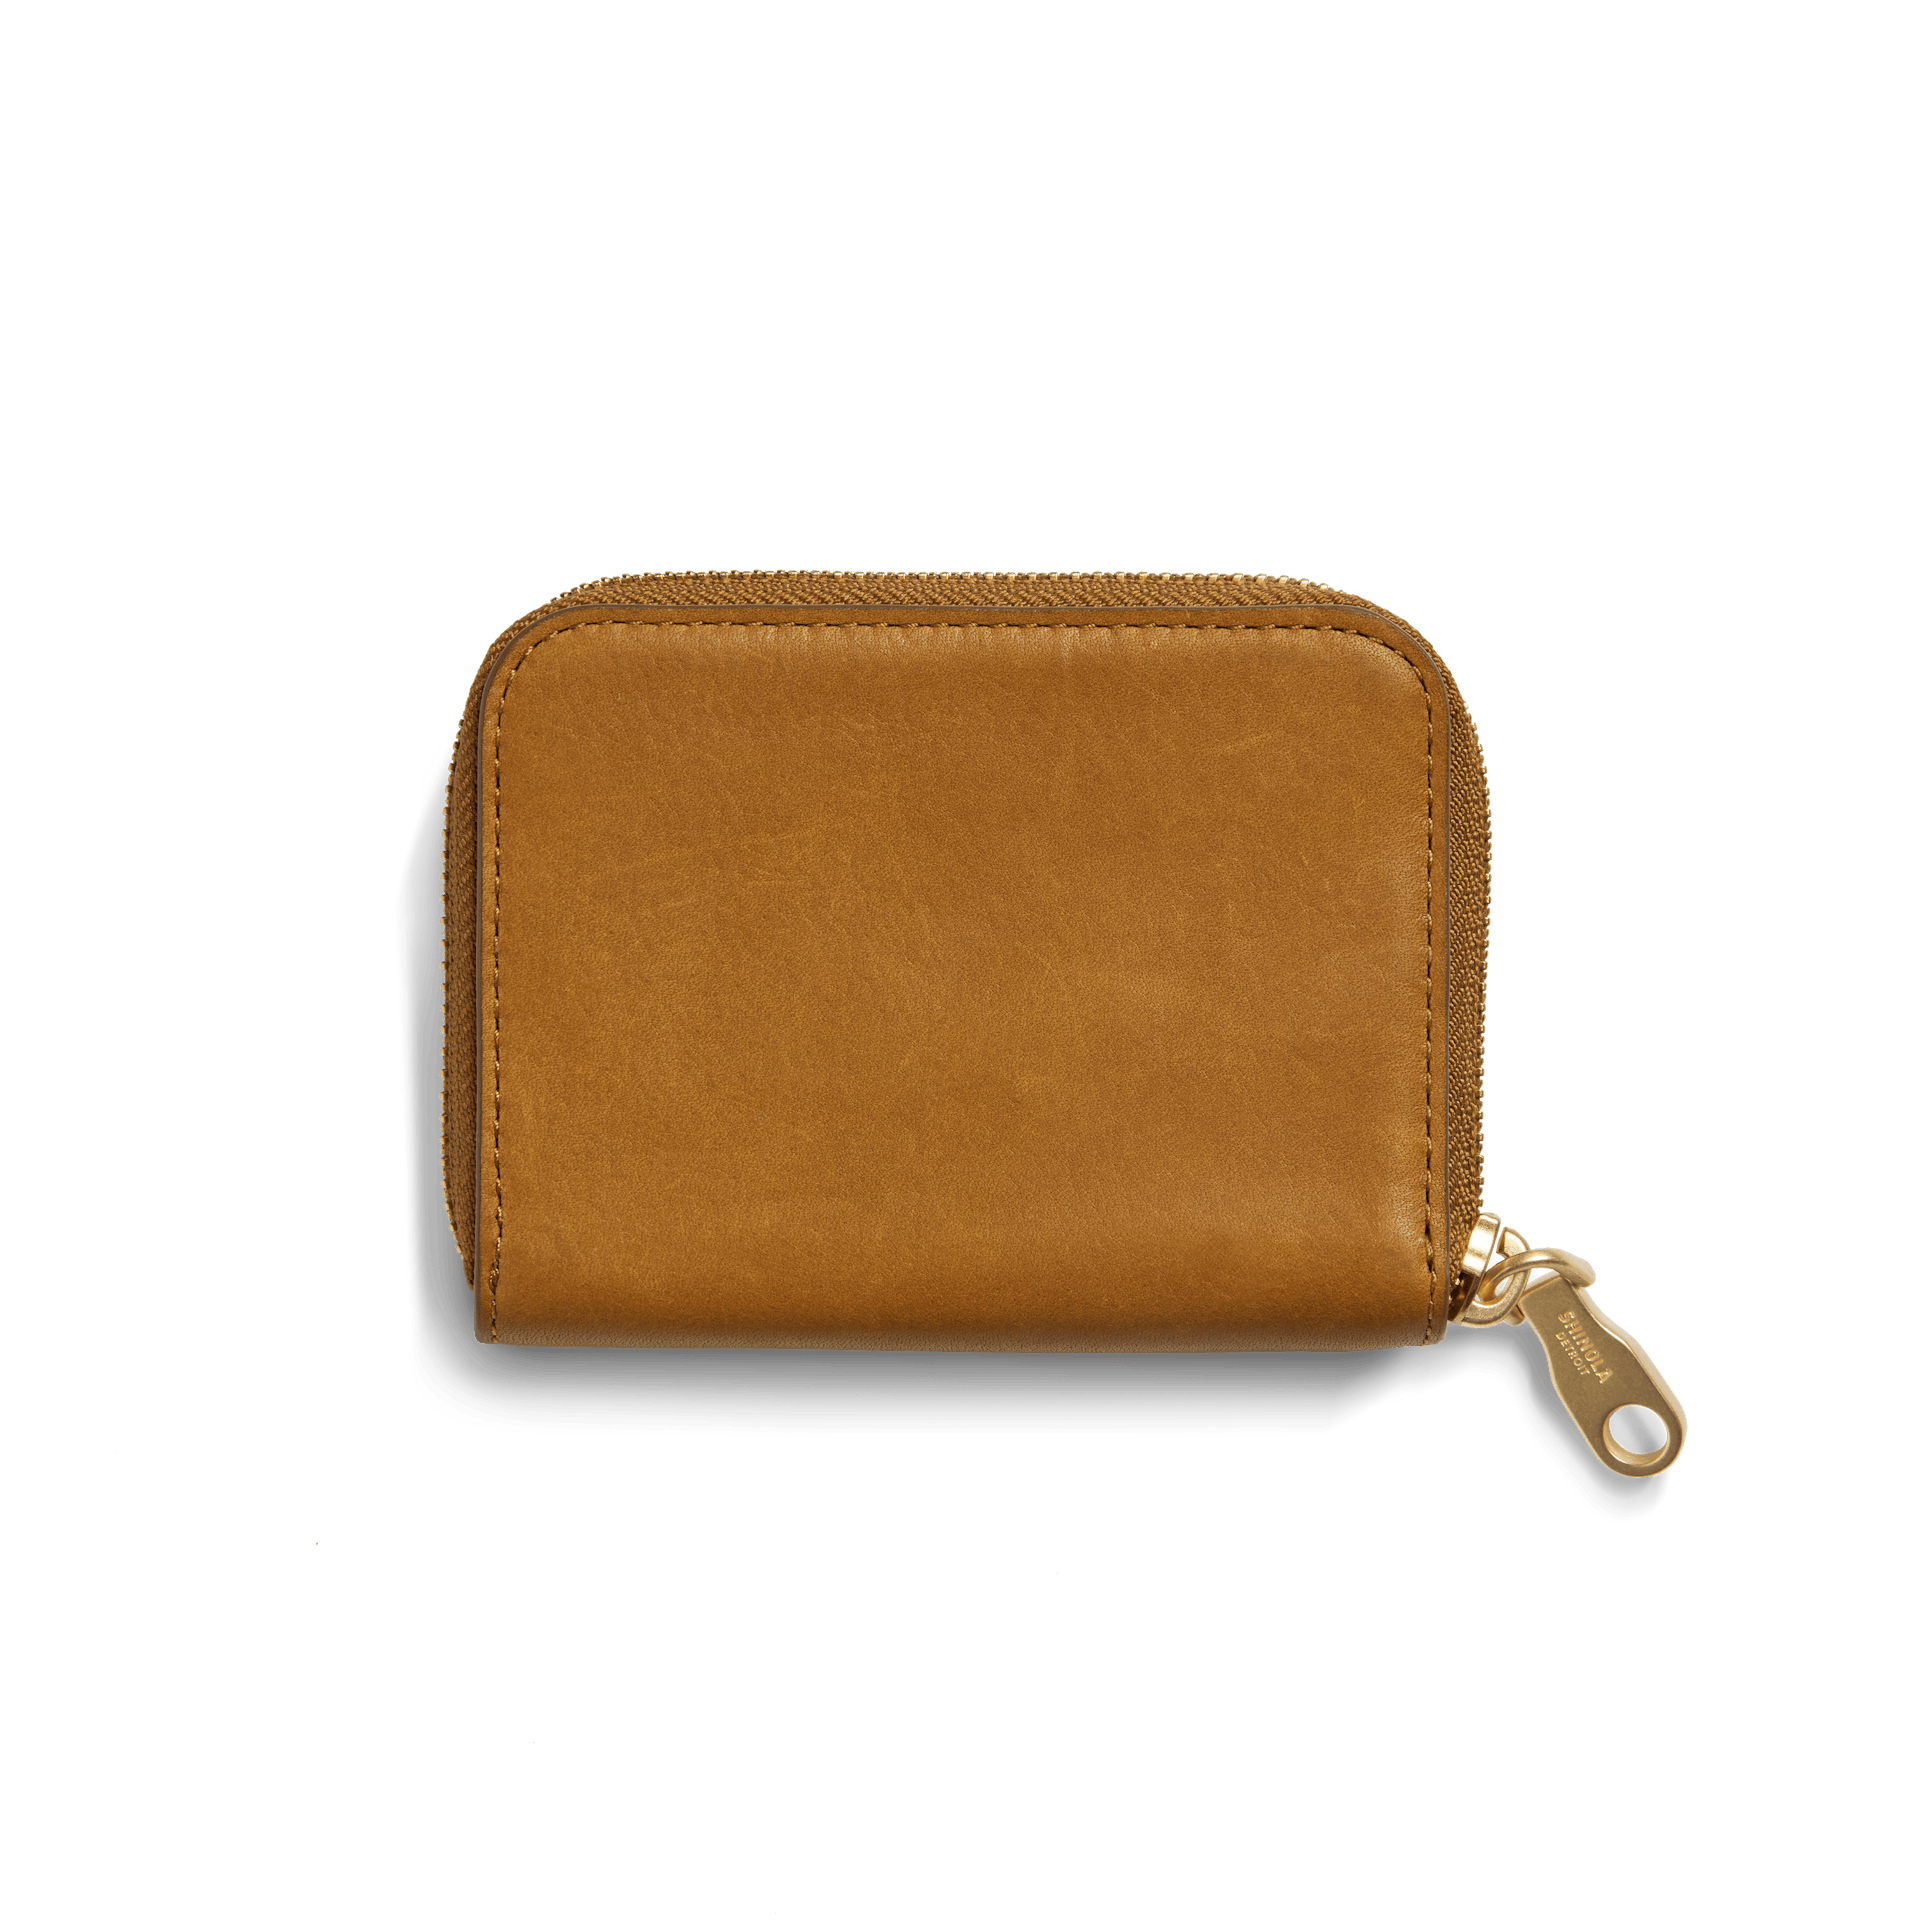 SYGA Womens Card Holder Coin Purse MultiCard Slot Case Zipper Small Leather  Wallet Online in India, Buy at Best Price from Firstcry.com - 15751528